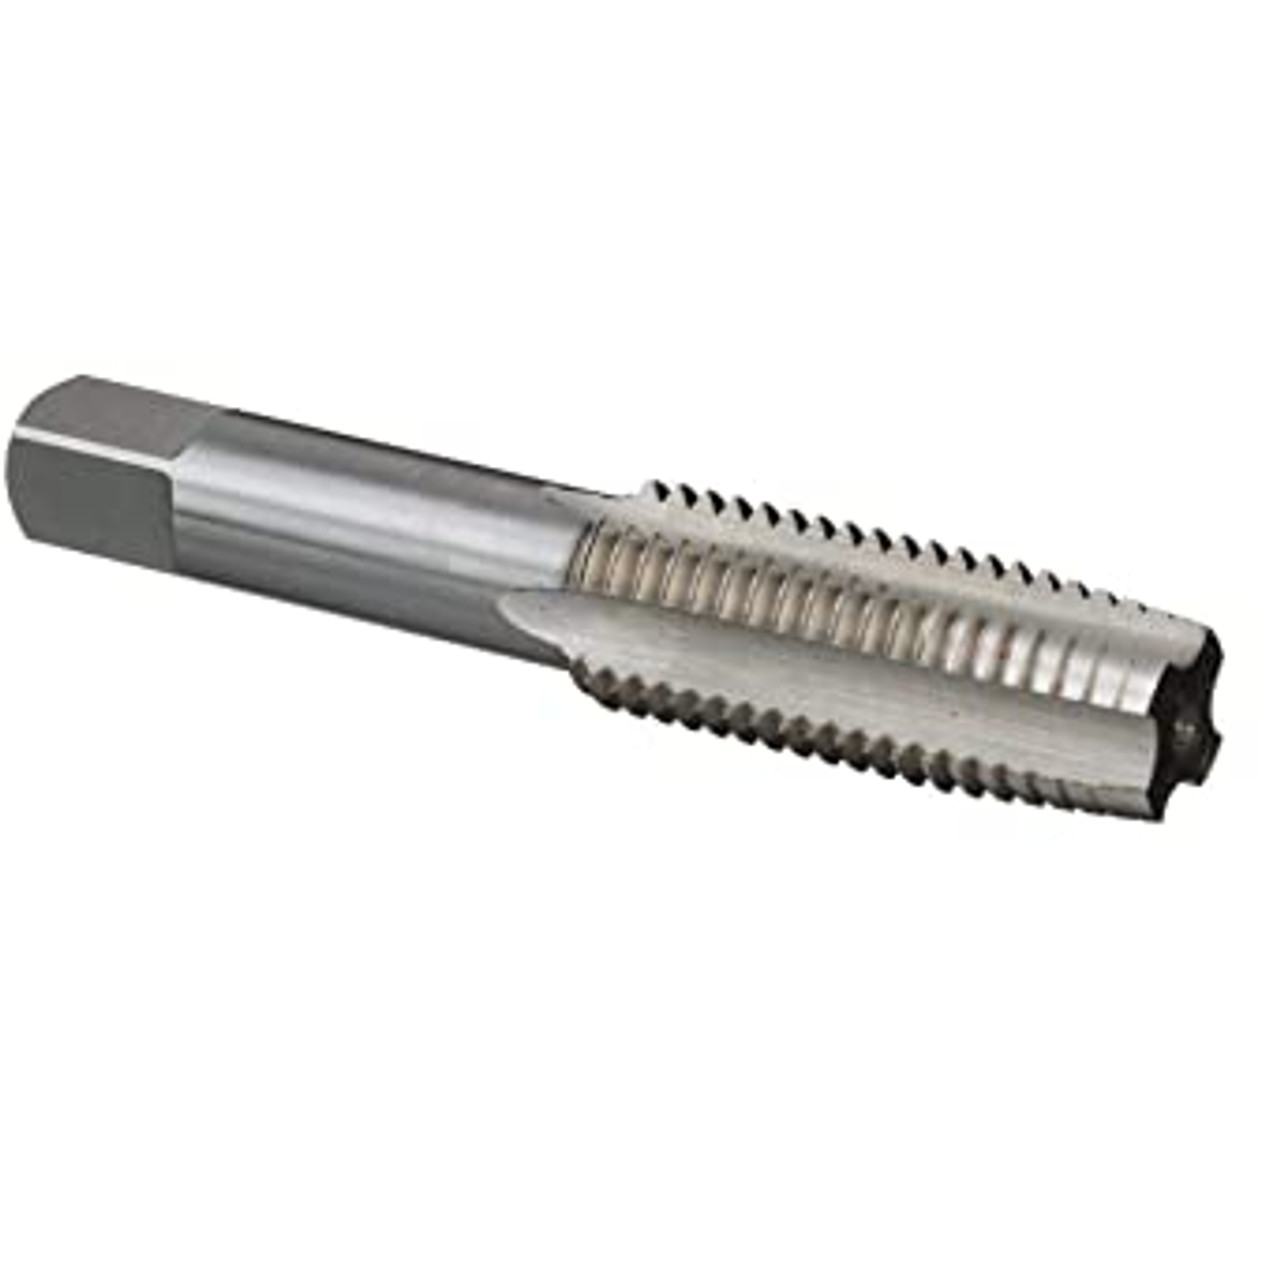 1/2"-13 Helicoil Tap  819-8